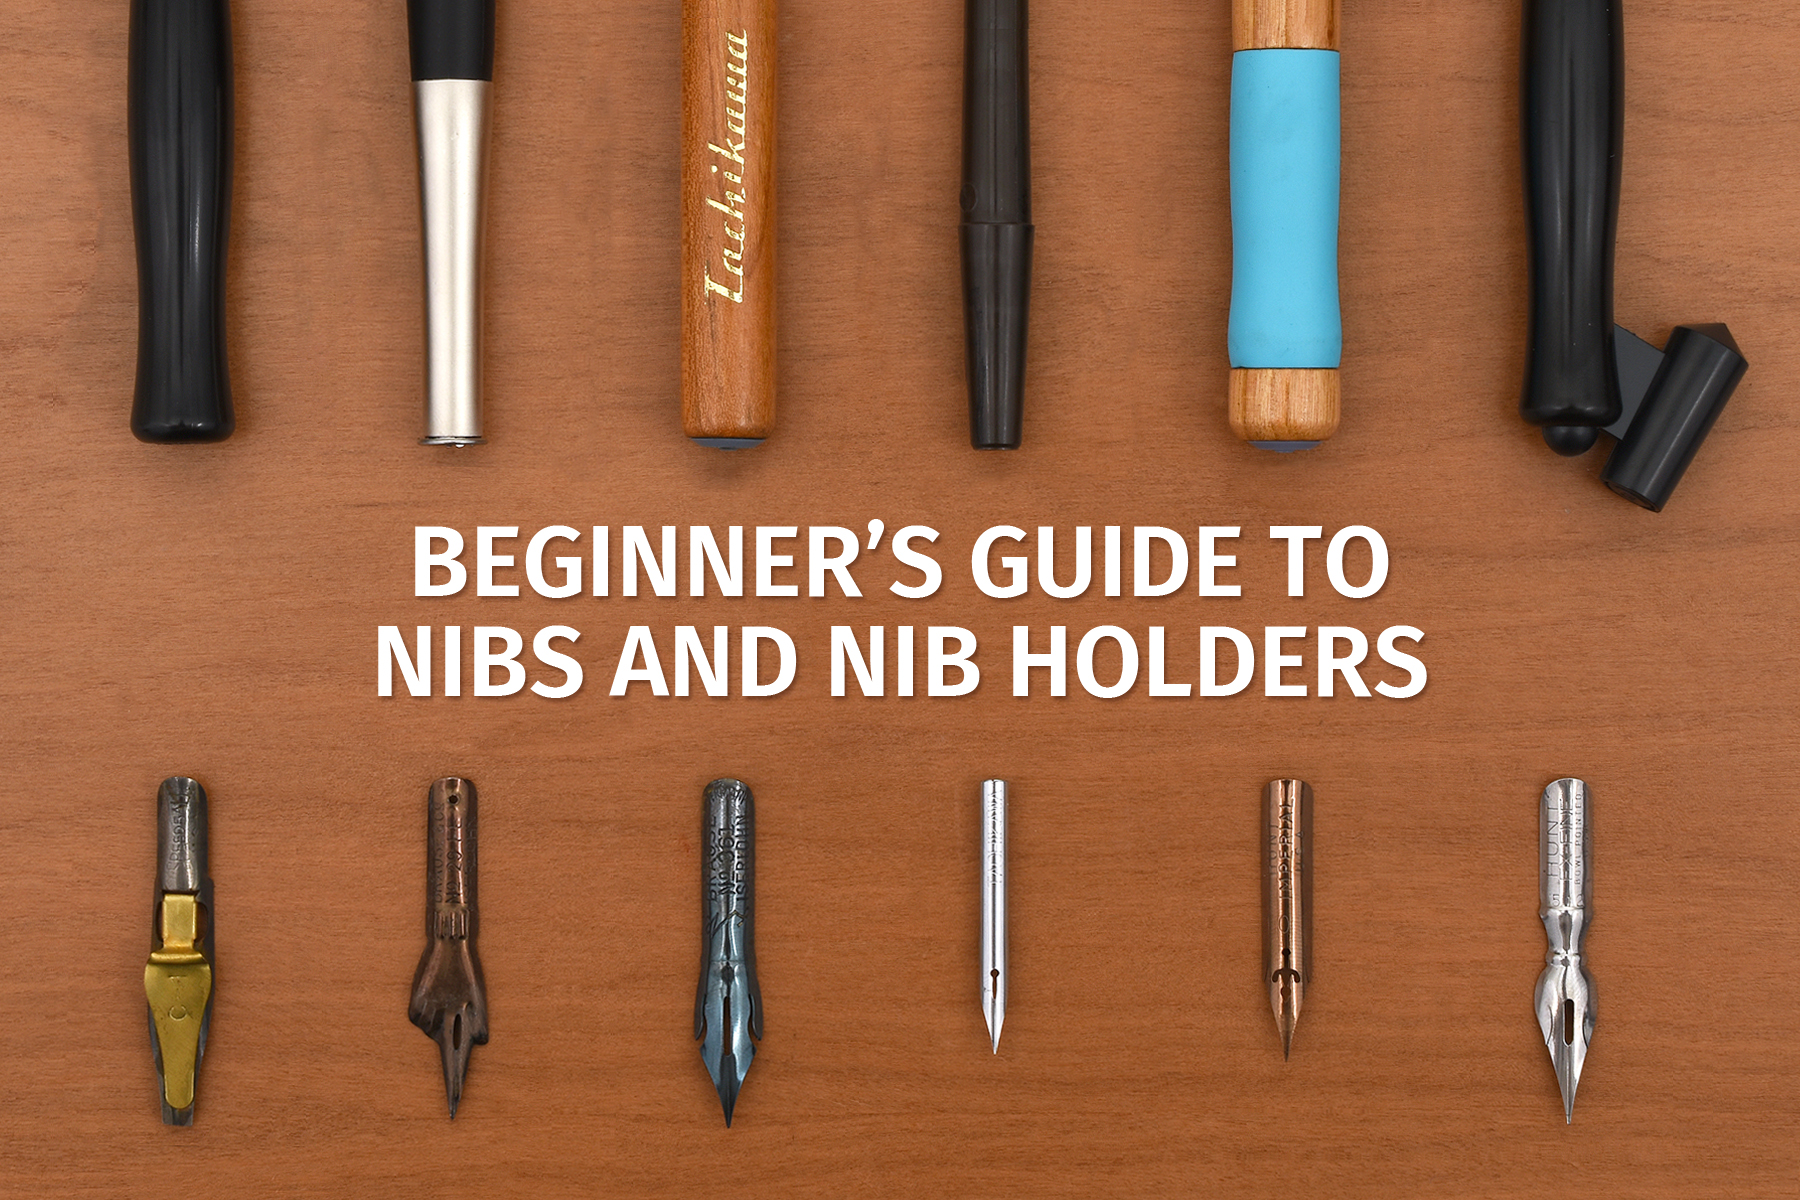 Beginner's Guide to Nibs and Nib Holders